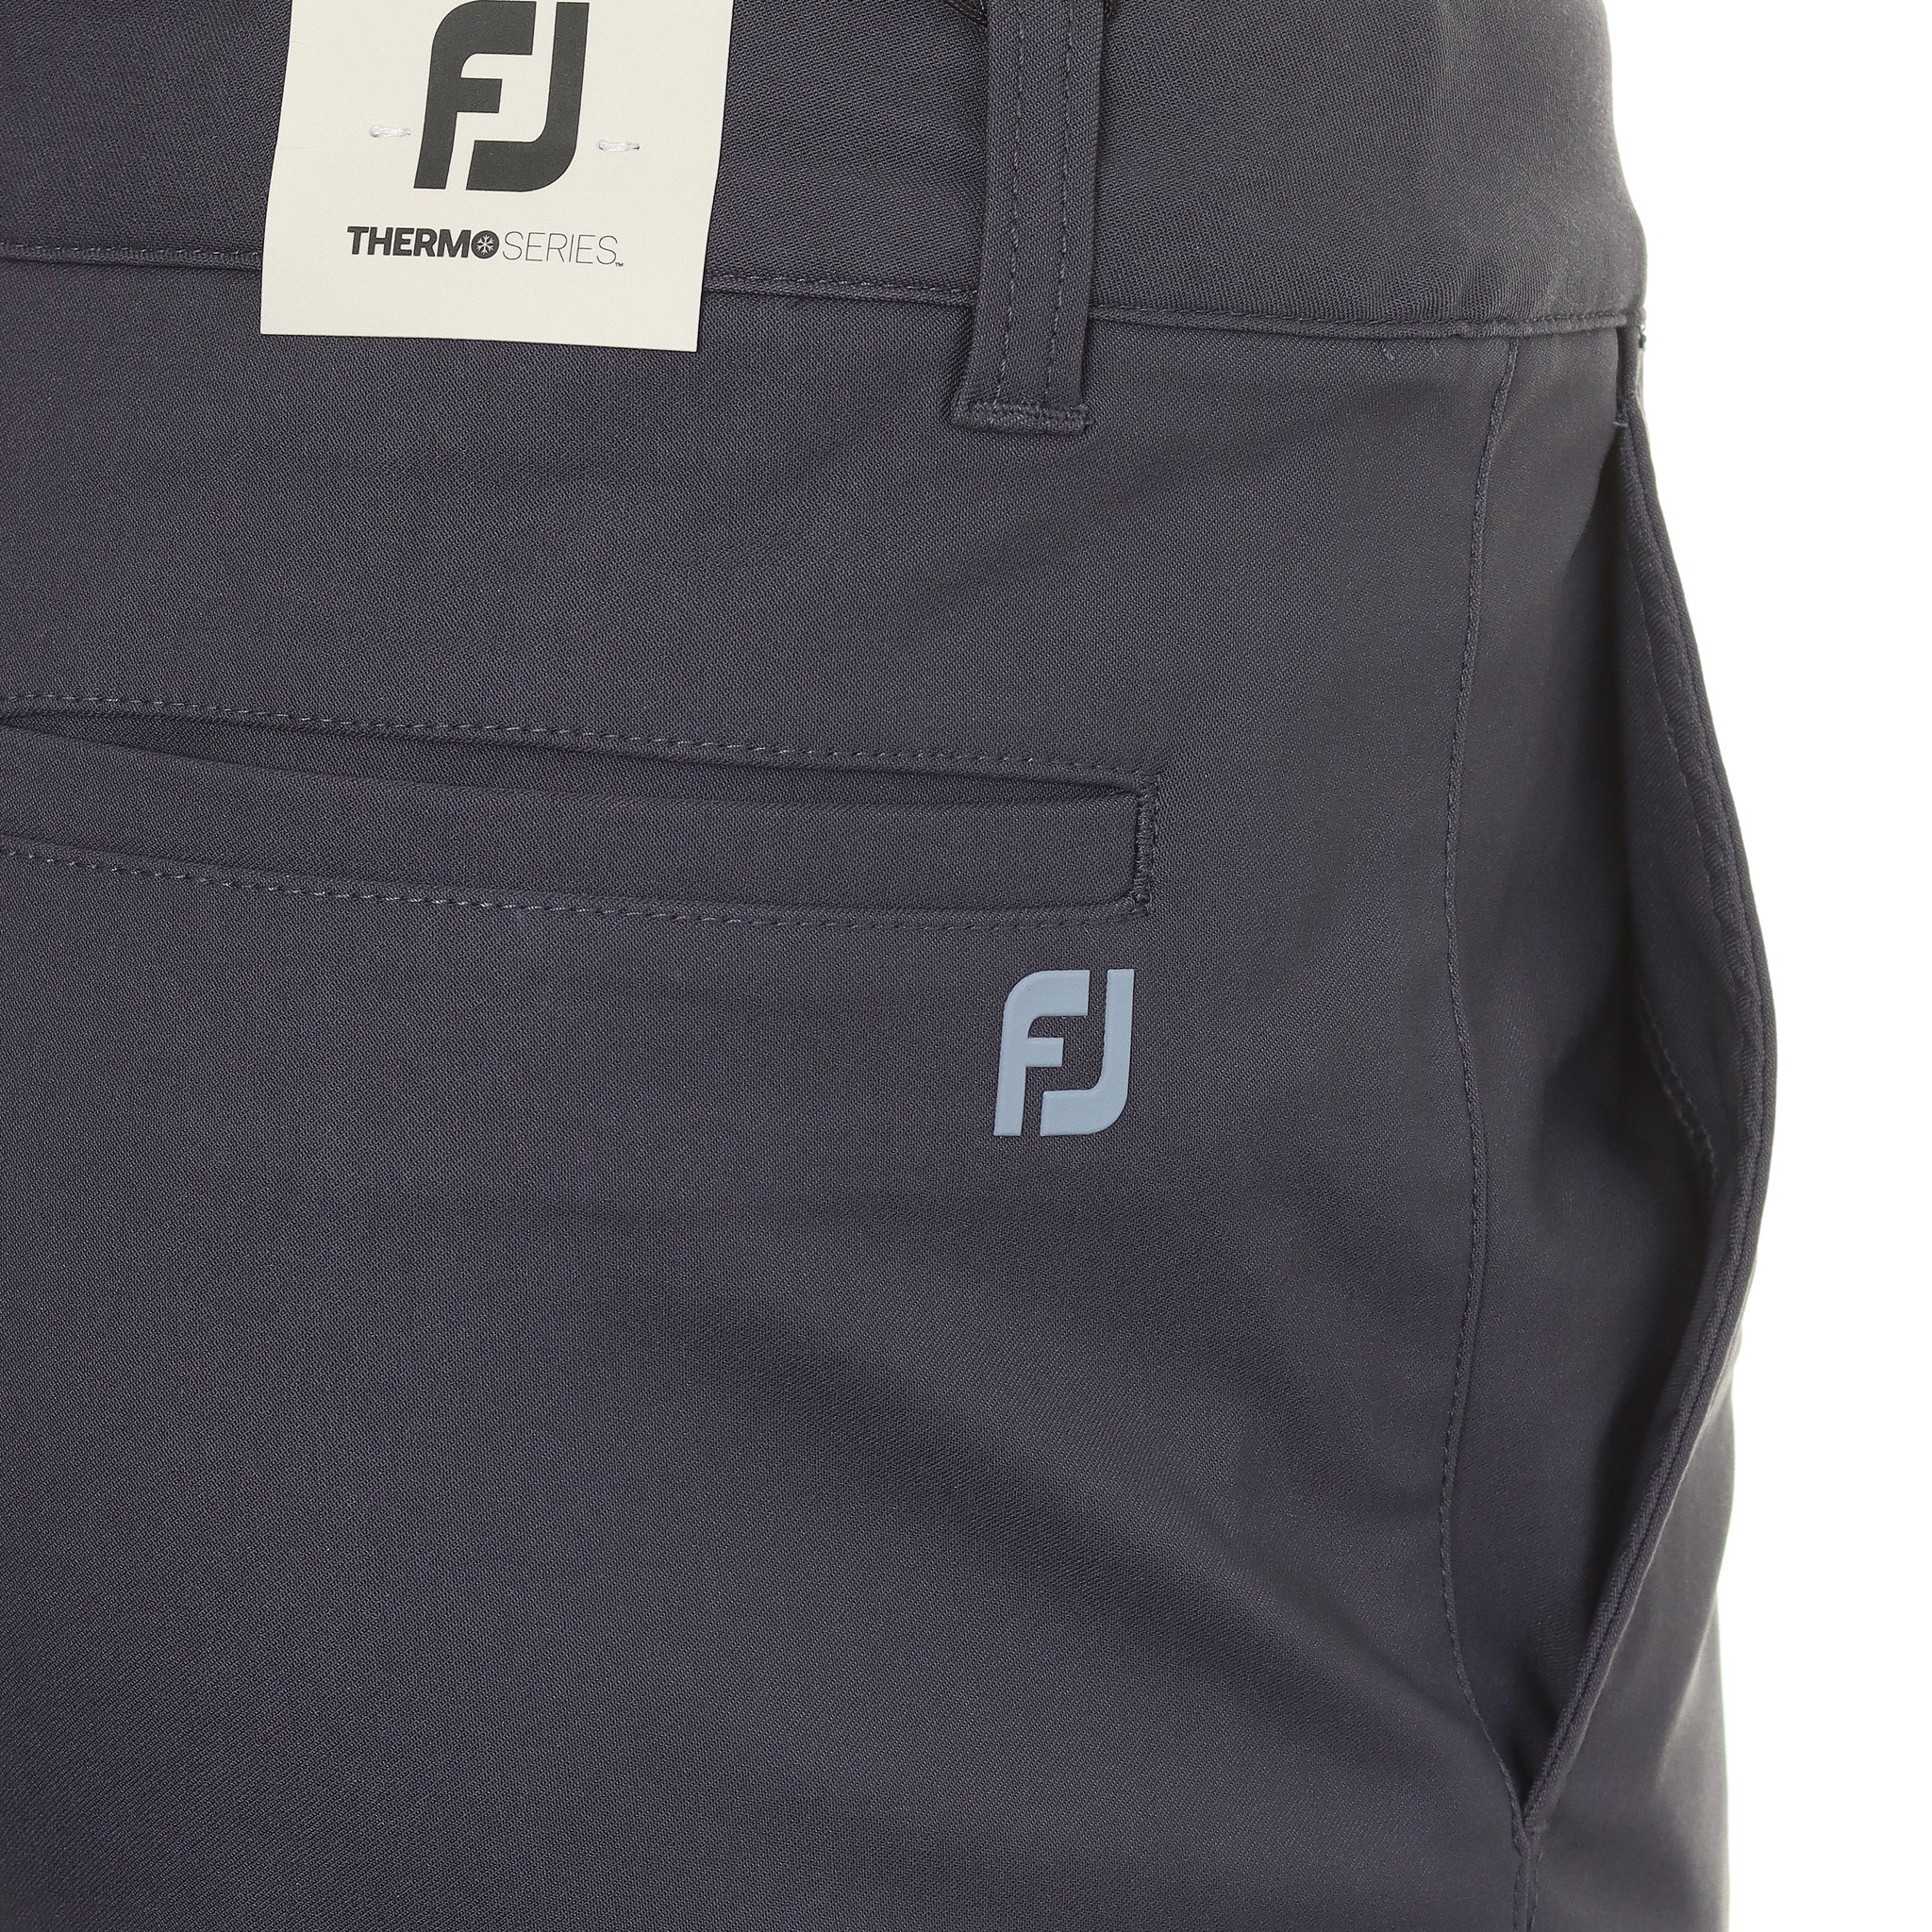 footjoy-thermoseries-trousers-88815-charcoal